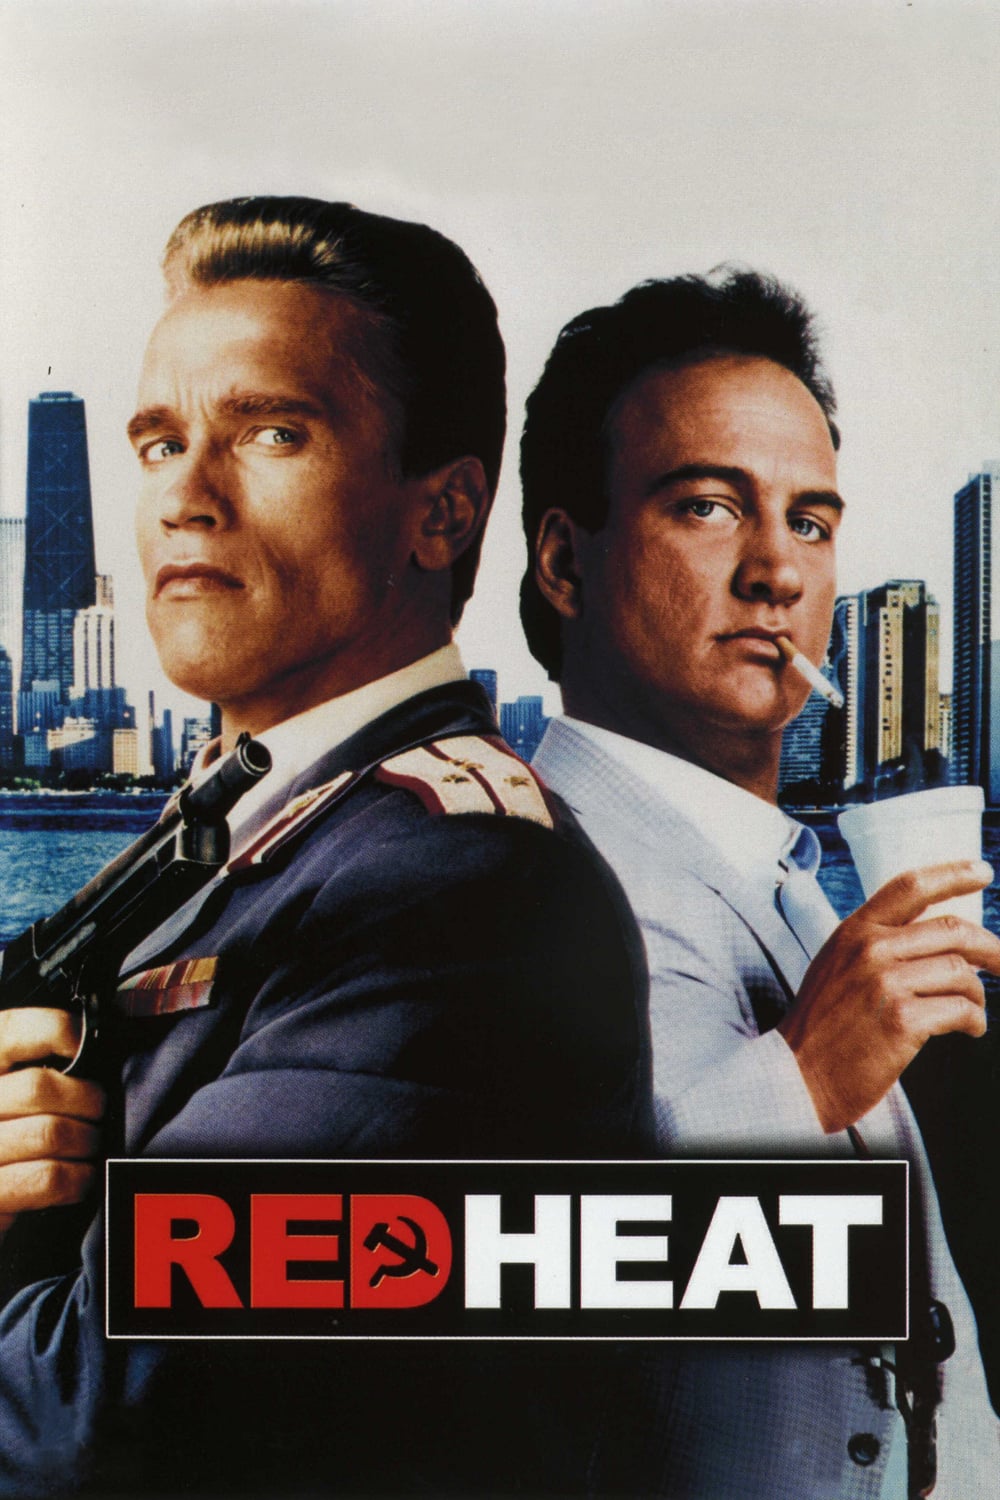 Poster for the movie "Red Heat"